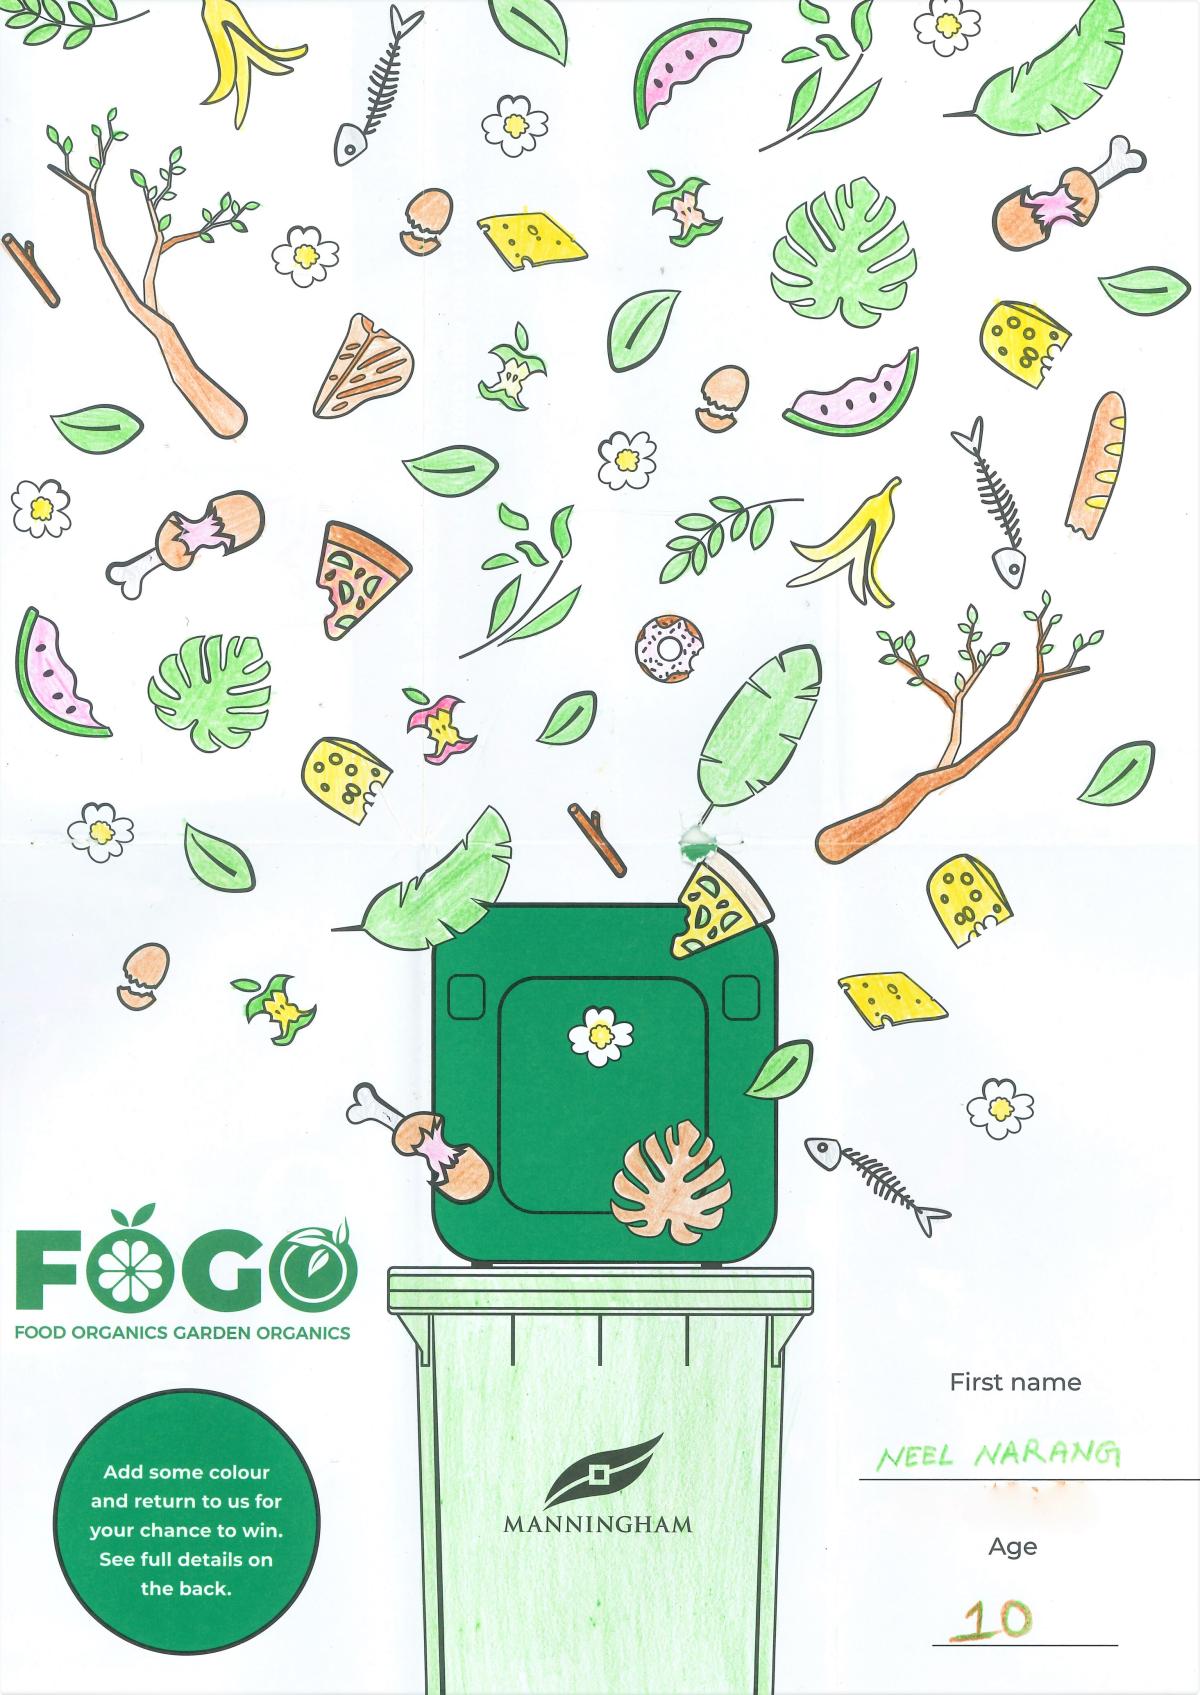 An image of a FOGO bin with all sorts of organic rubbish falling into it from above. The name 'Neel' is in the bottom right corner.